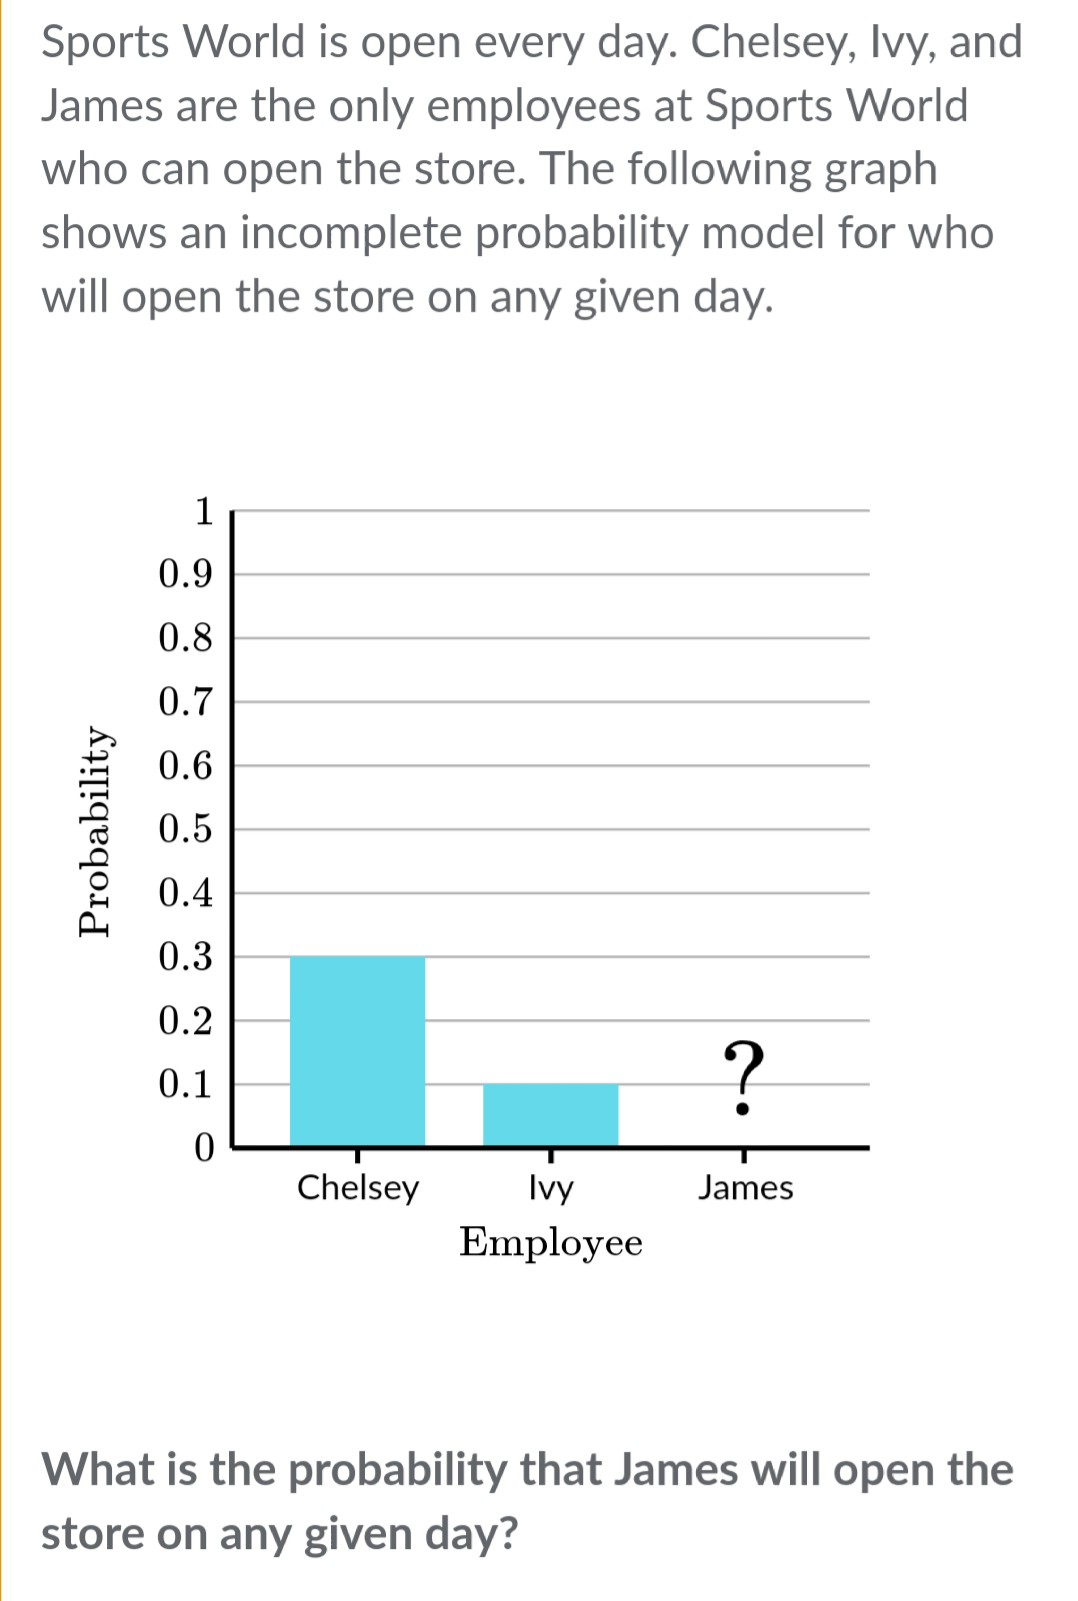 Sports World is open every day. Chelsey, Ivy, and James are the only employees at Sports World who can open the store. The following graph shows an incomplete probability model for who will open the store on any given day.

What is the probability that James will open the store on any given day?